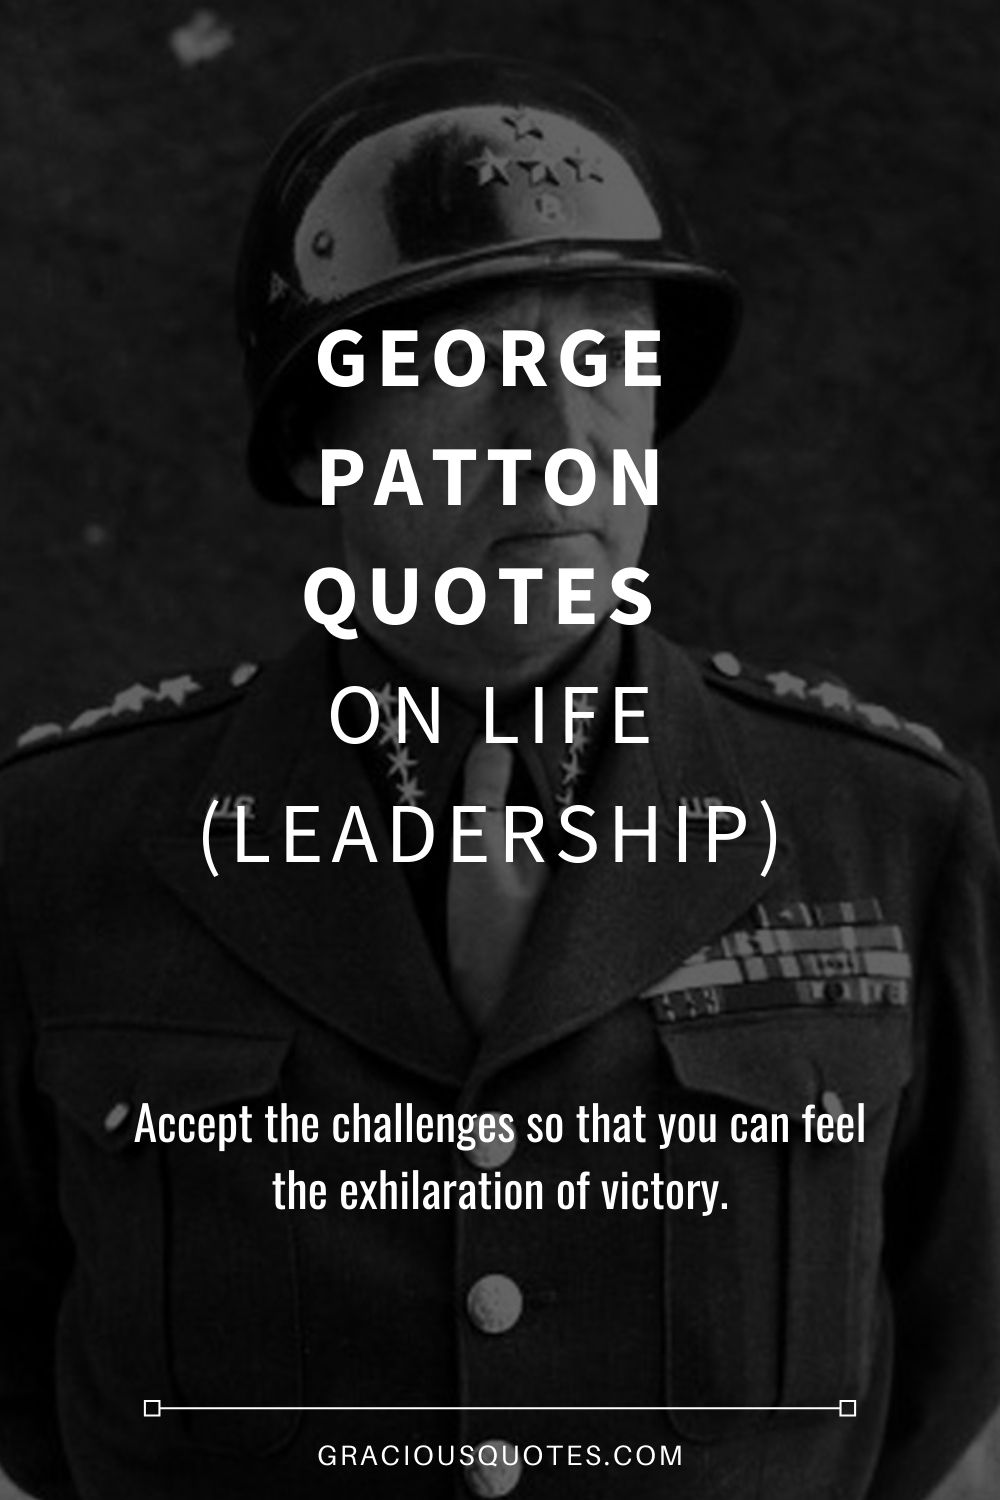 George Patton Quotes on Life (LEADERSHIP) - Gracious Quotes